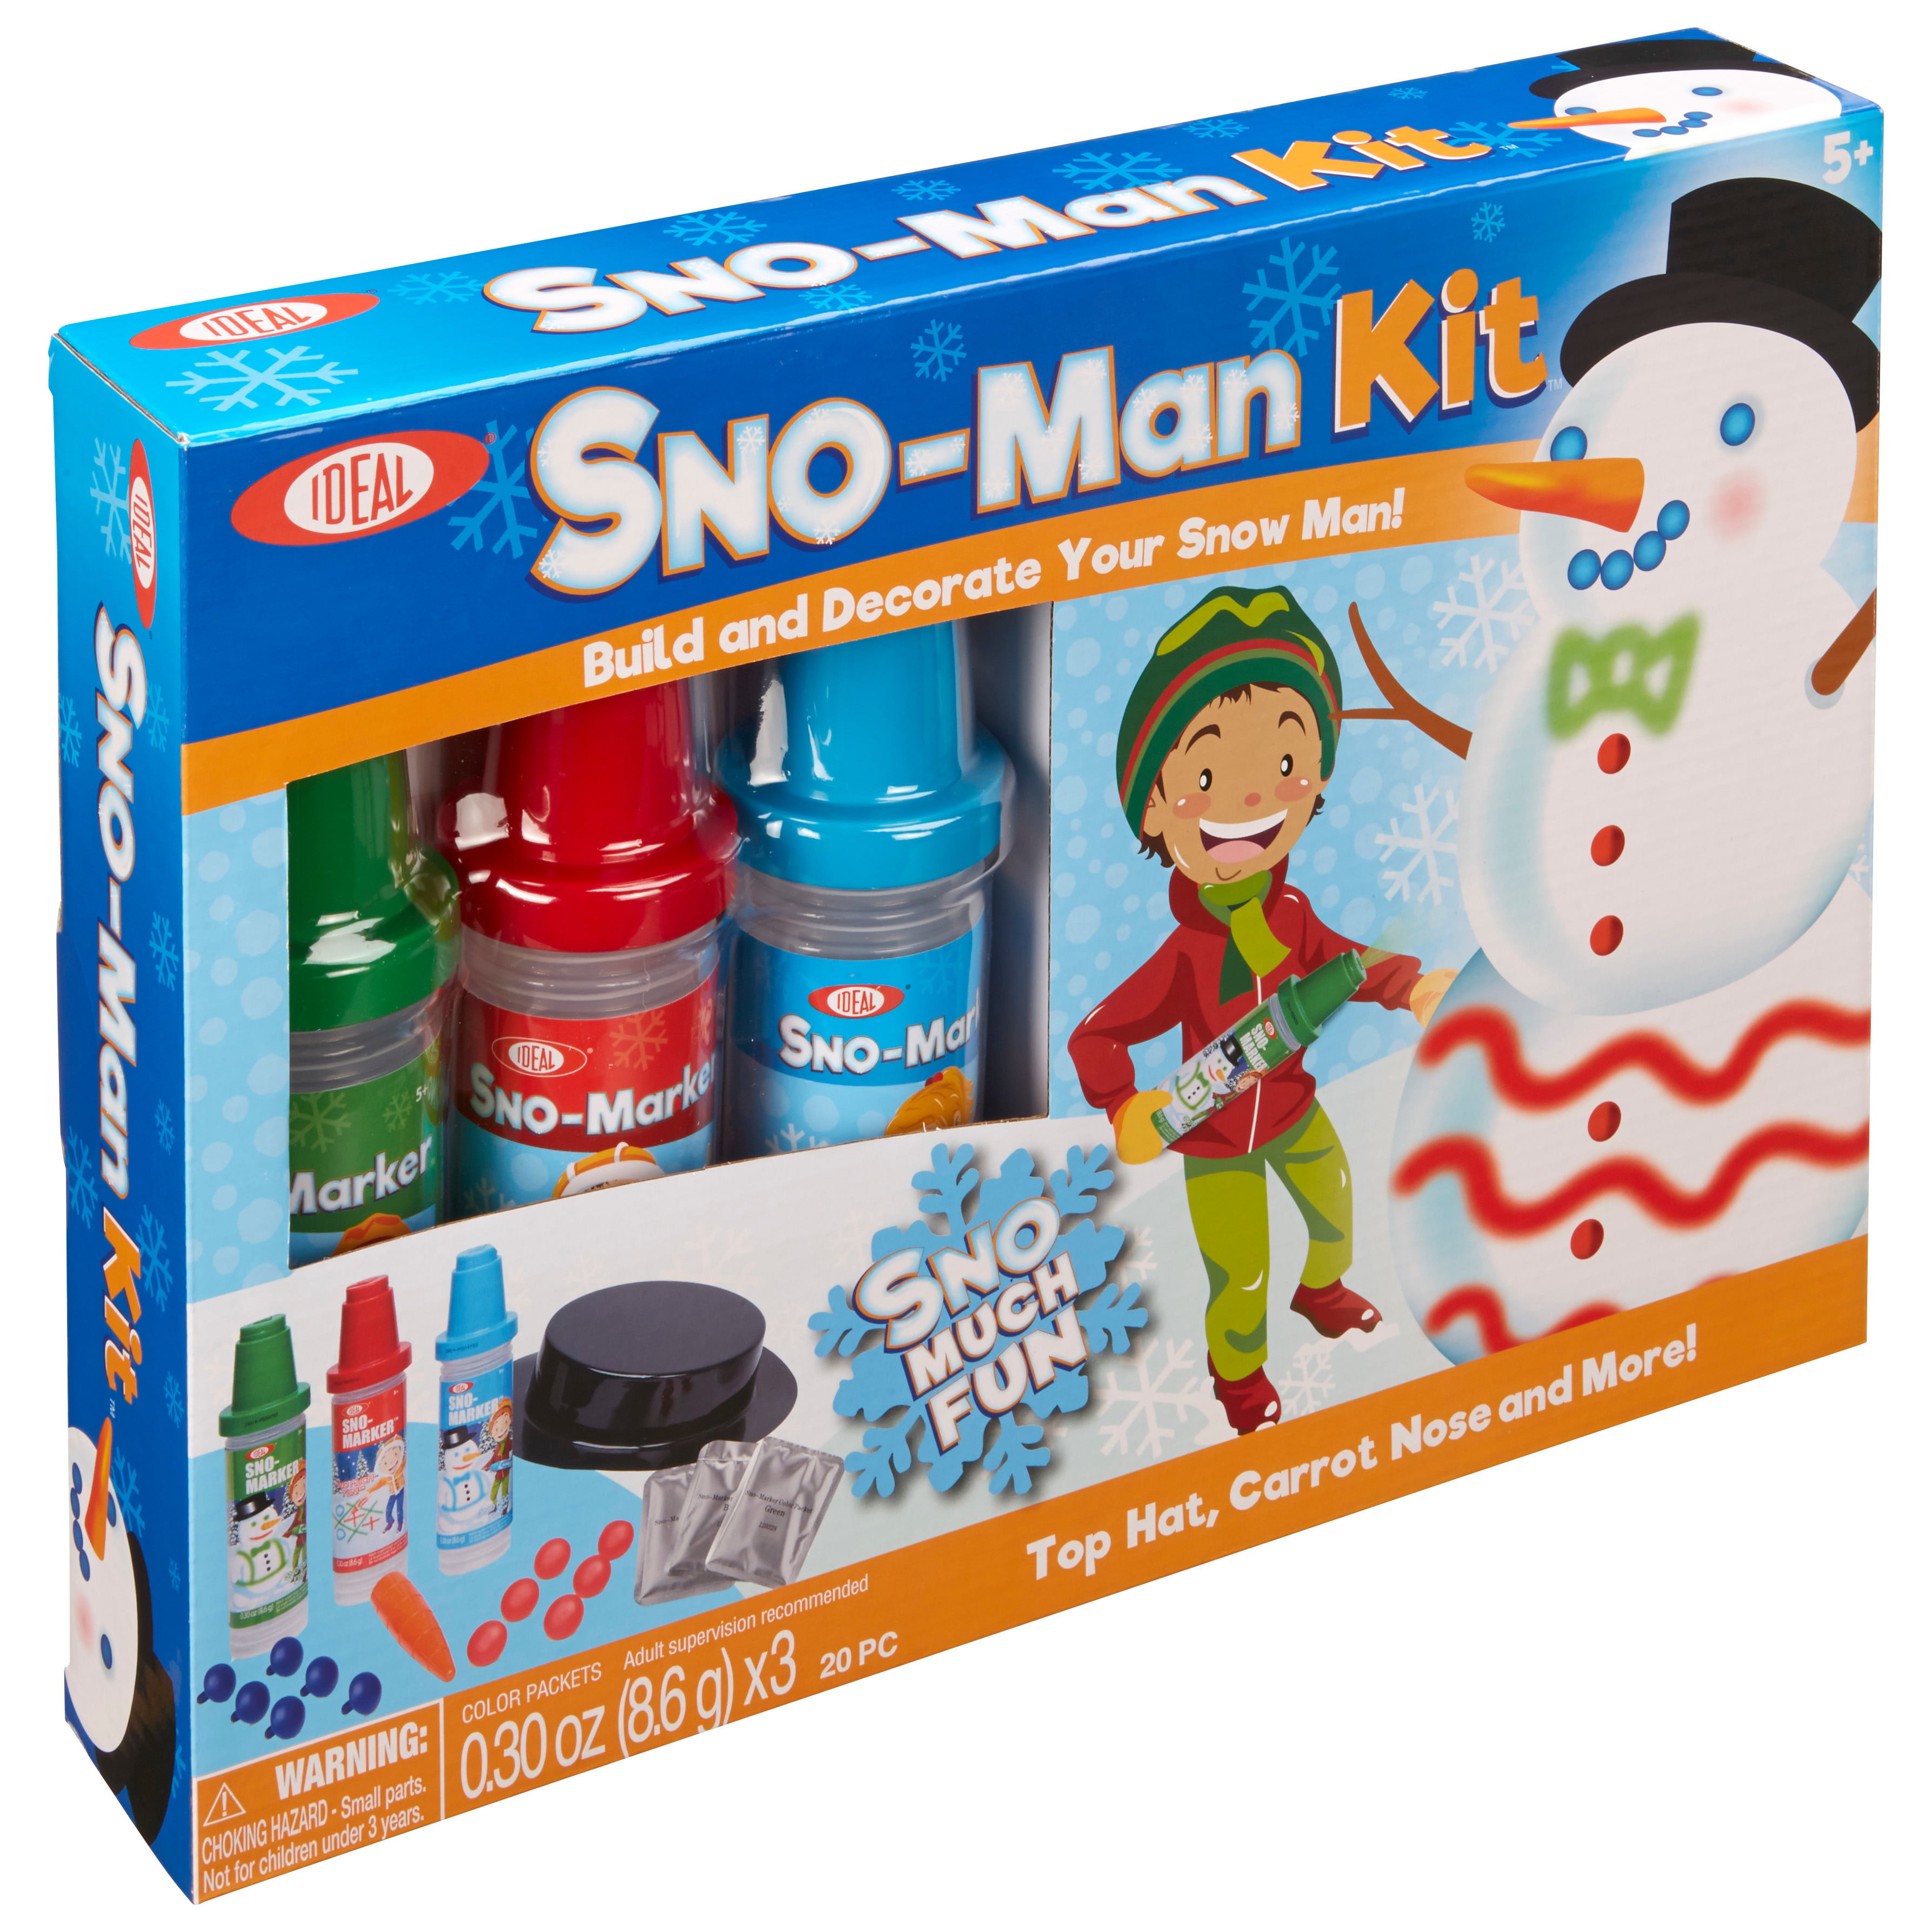 Sno Ultimate Deluxe Snow Art Set by Ideal Build Spray kit 